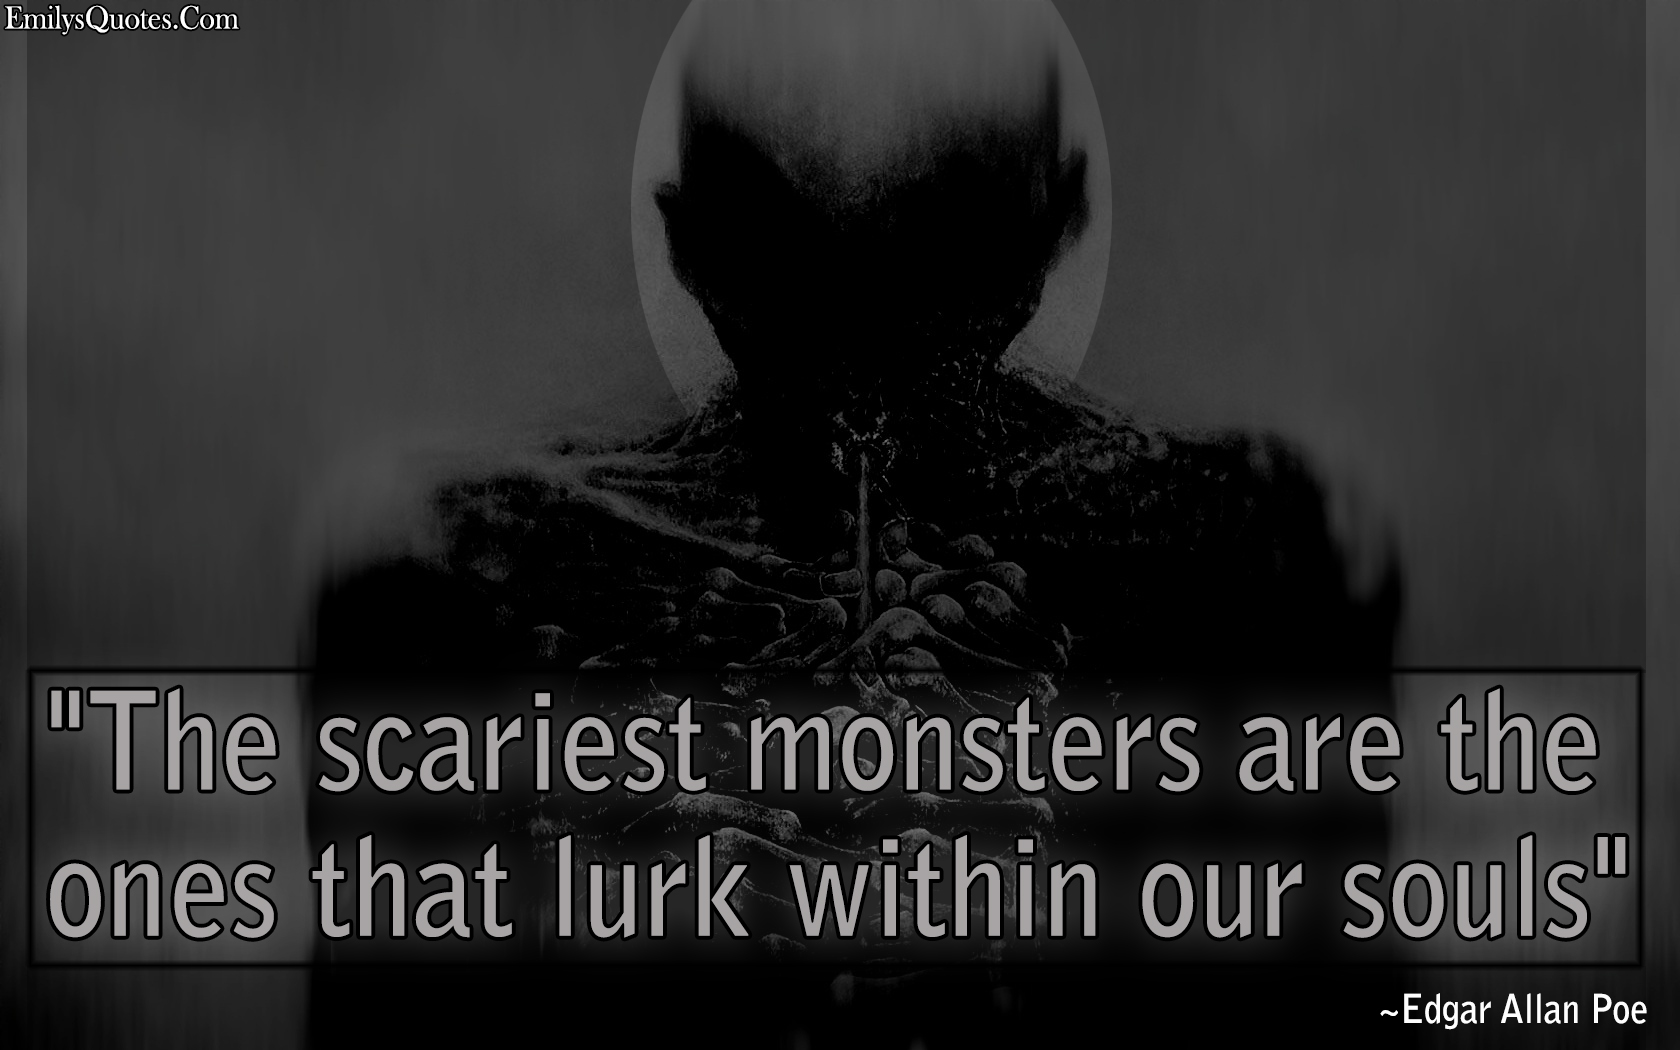 Poe Quotes Wallpaper Evil Quotes Hd Wallpaper - Scary Monster Quotes - HD Wallpaper 